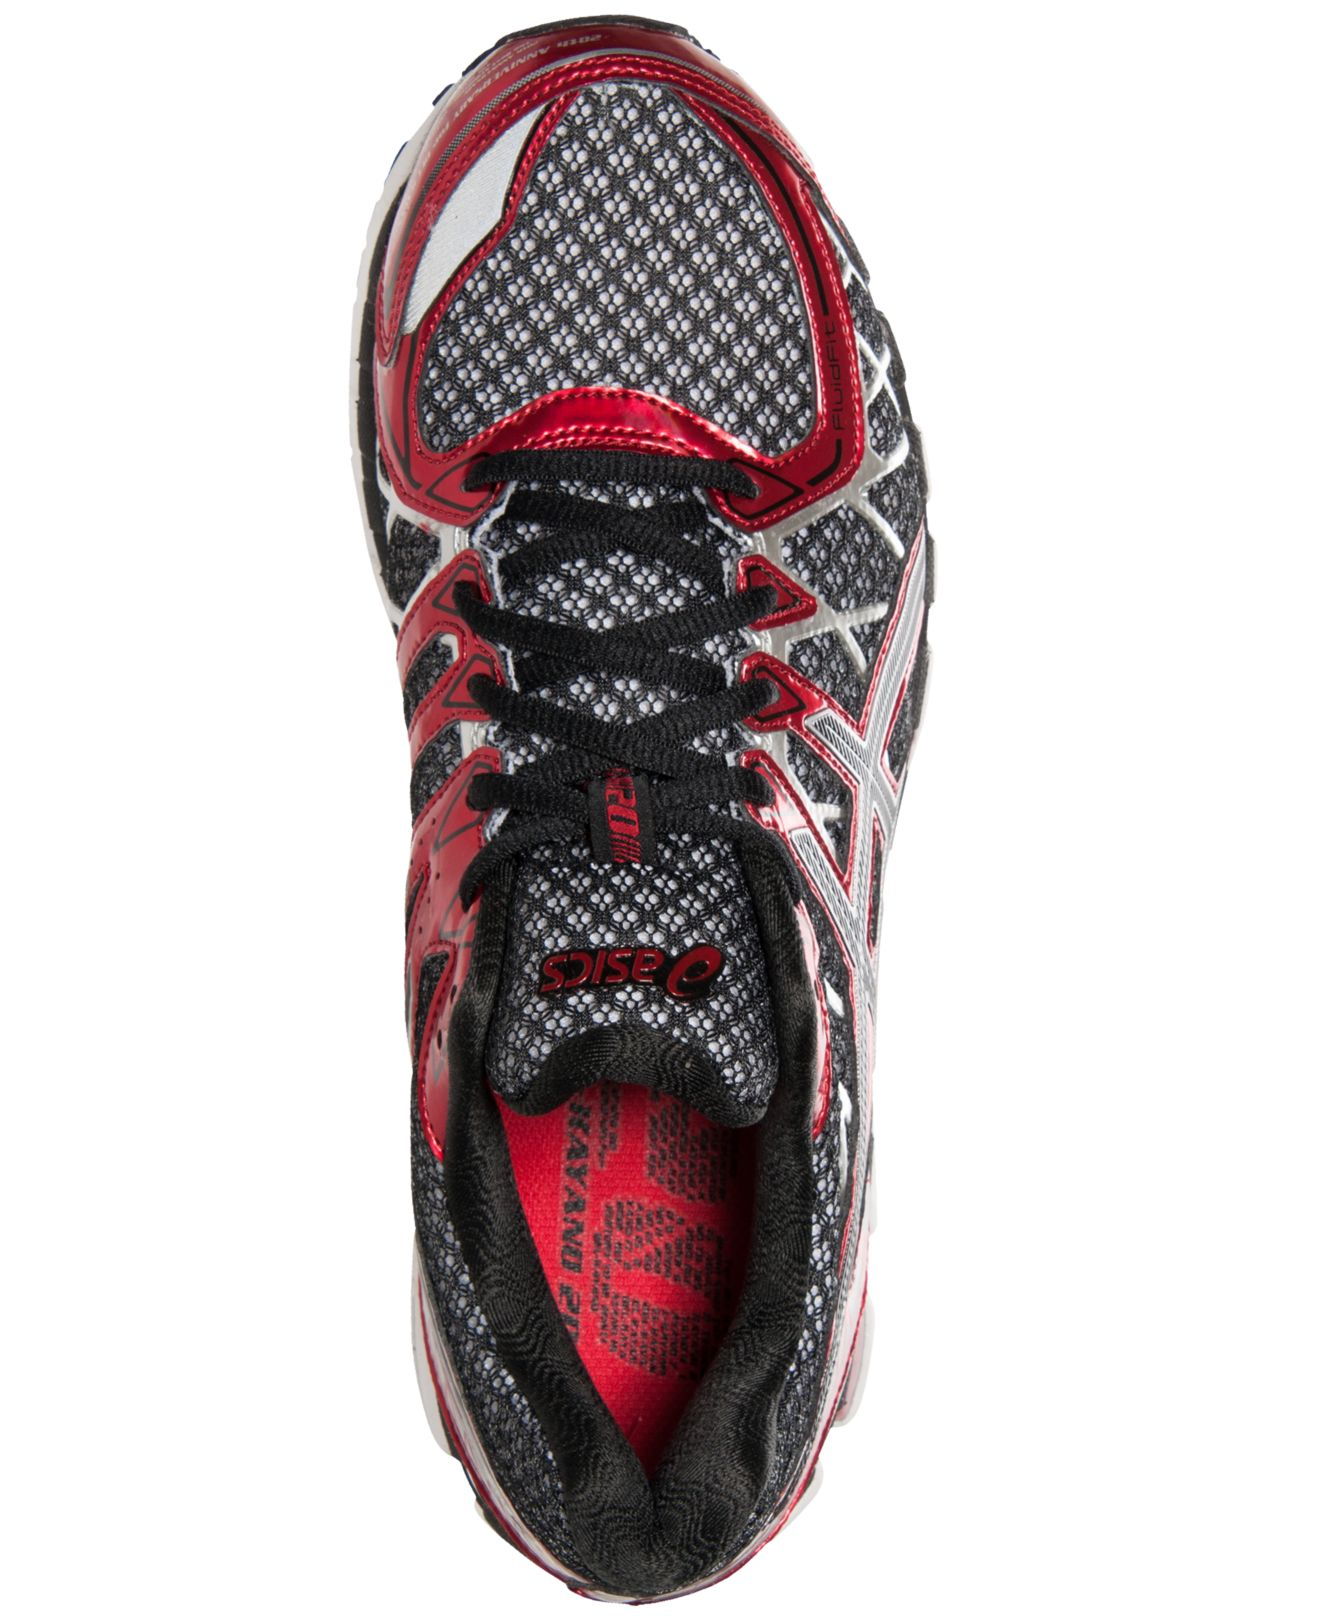 Lyst - Asics Men'S Gel-Kayano 20 Running Sneakers From Finish Line in ...